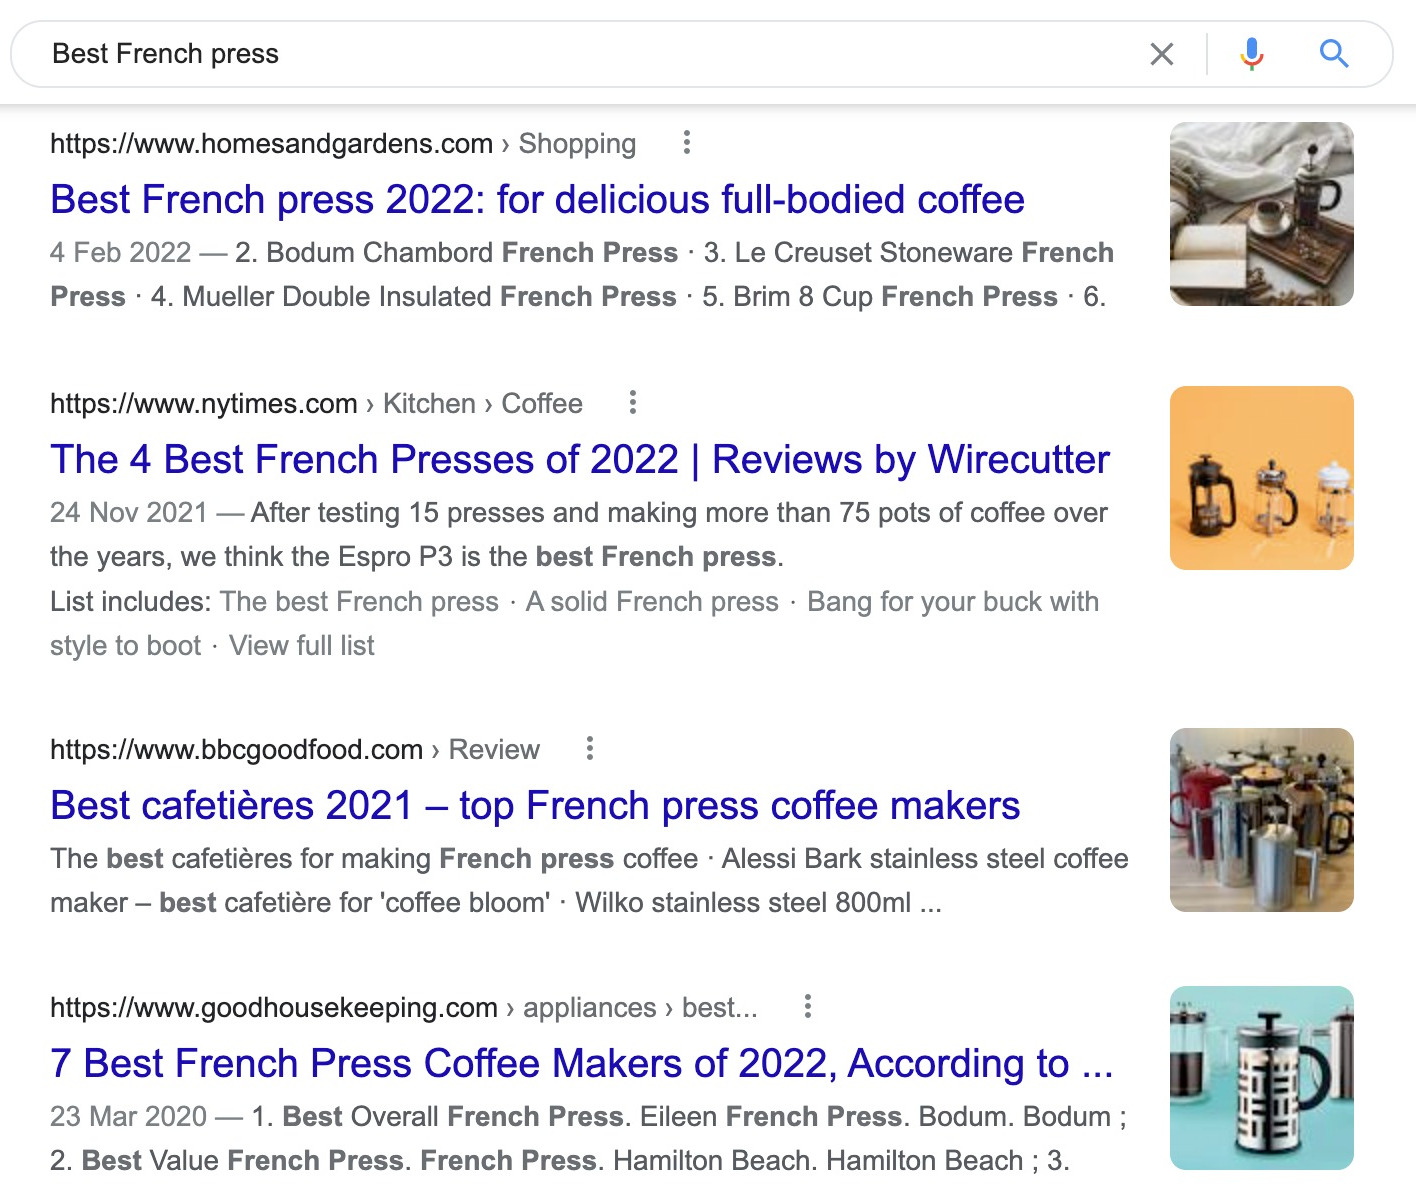 Google SERP for "best French press"